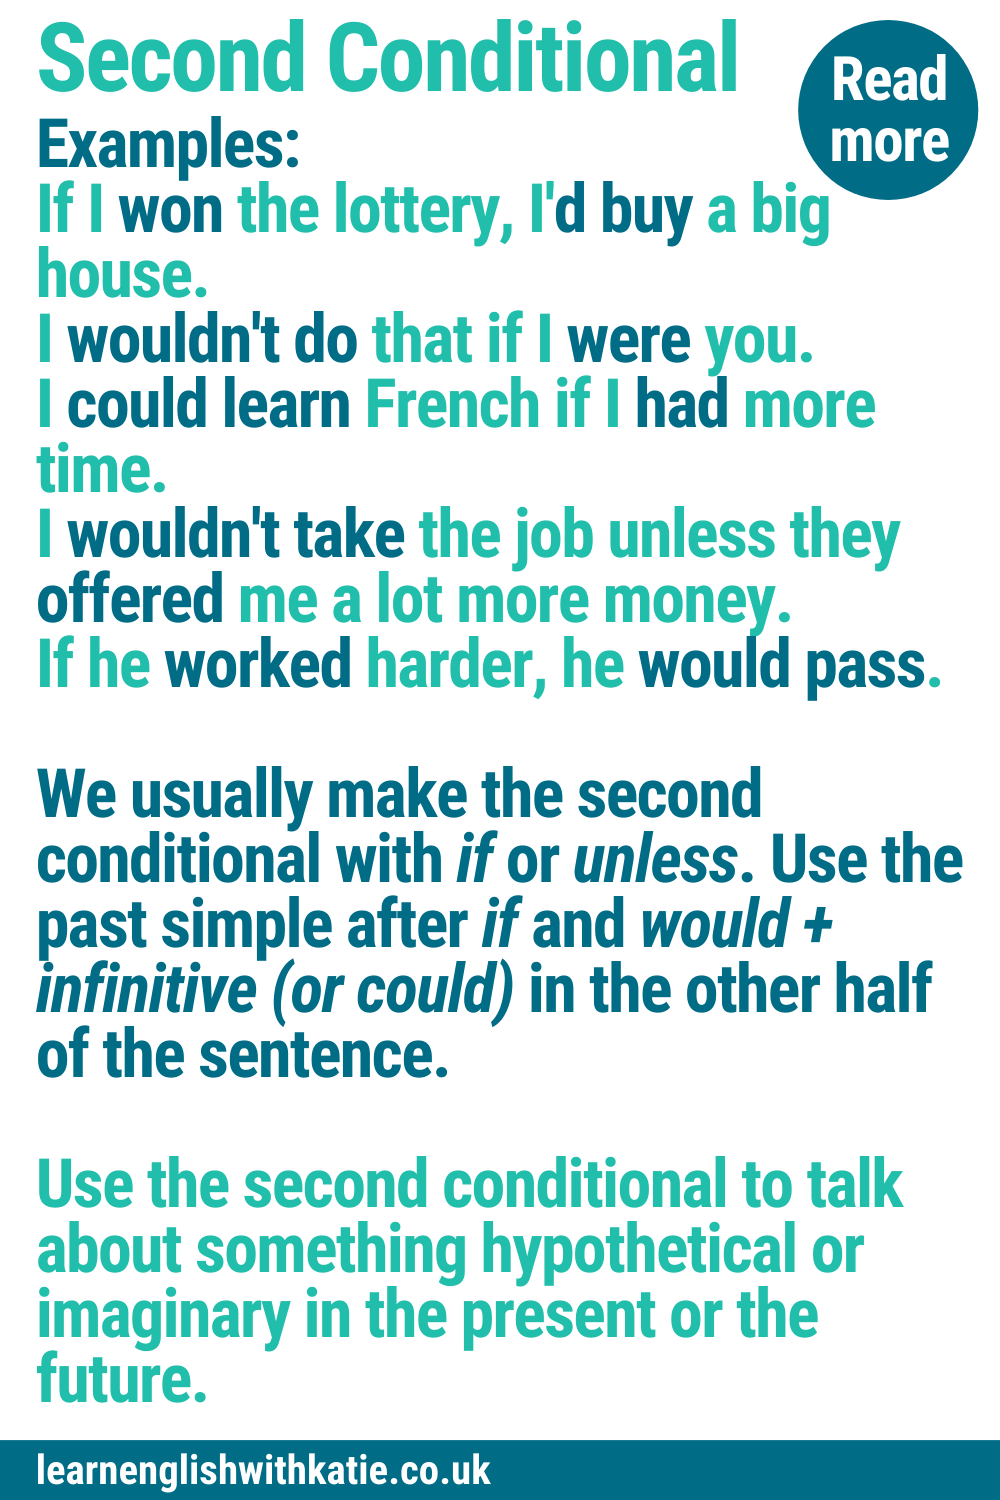 Pinterest infographic summarising the second conditional